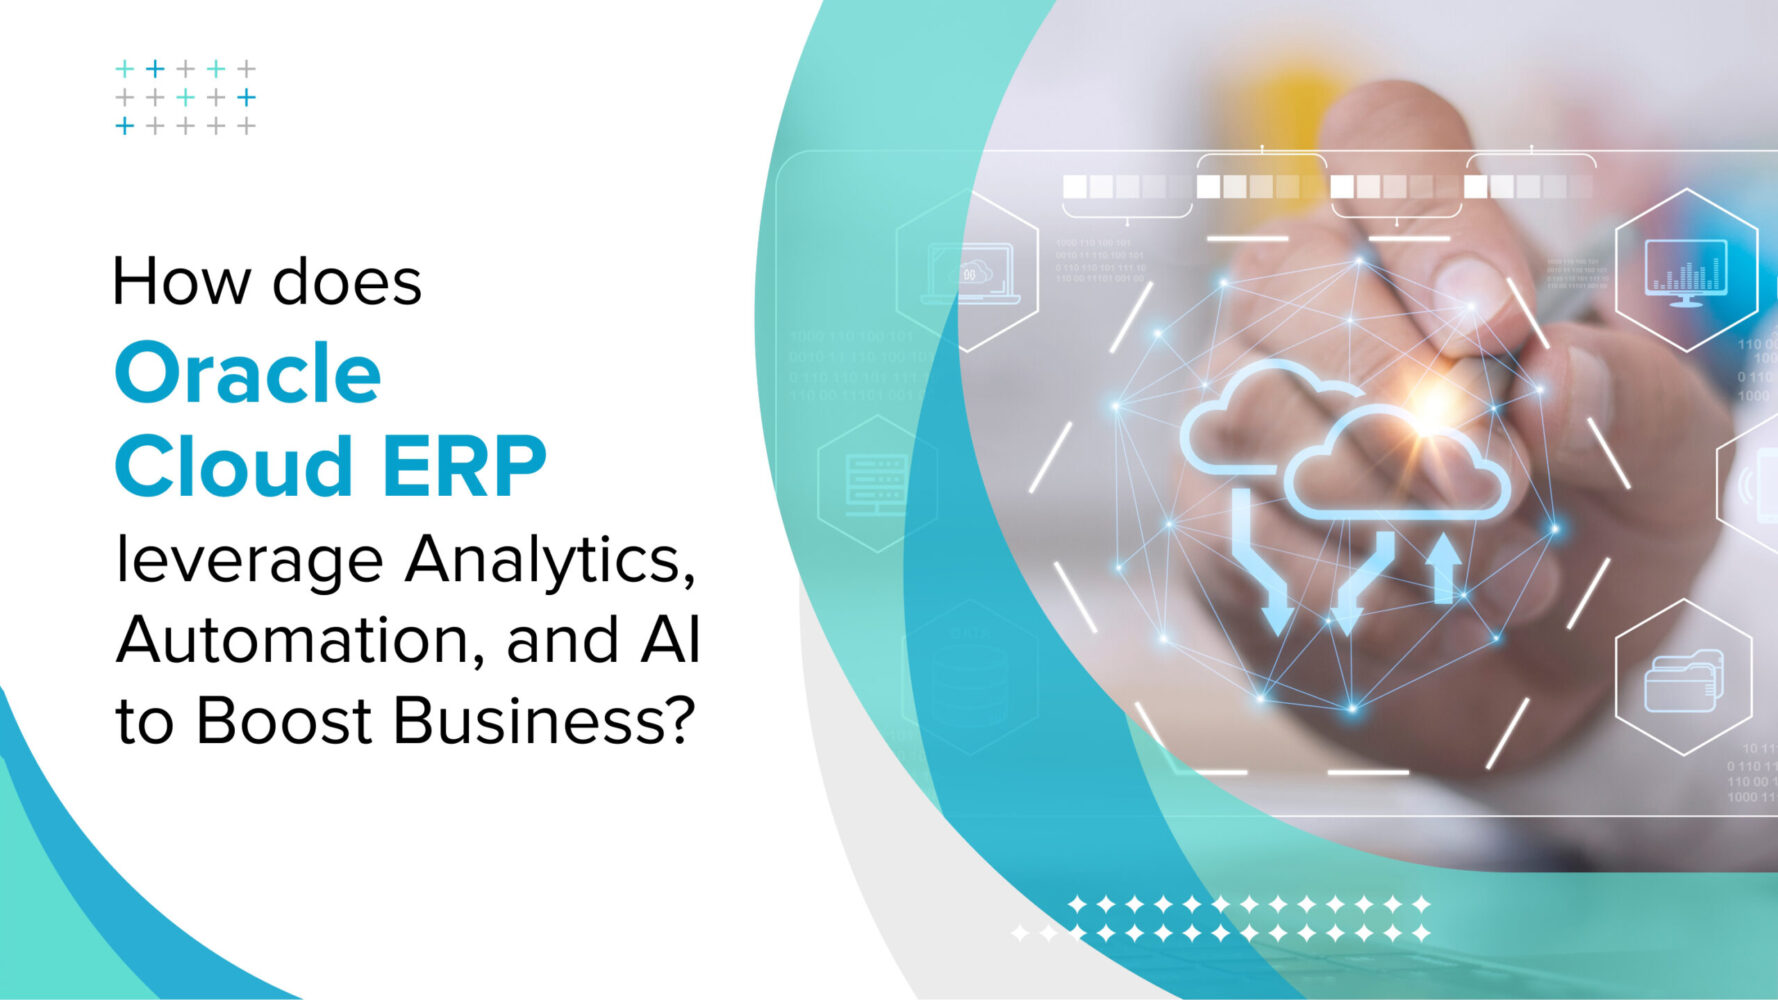 How does Oracle Cloud ERP leverage Analytics, Automation, and AI to Boost Business?